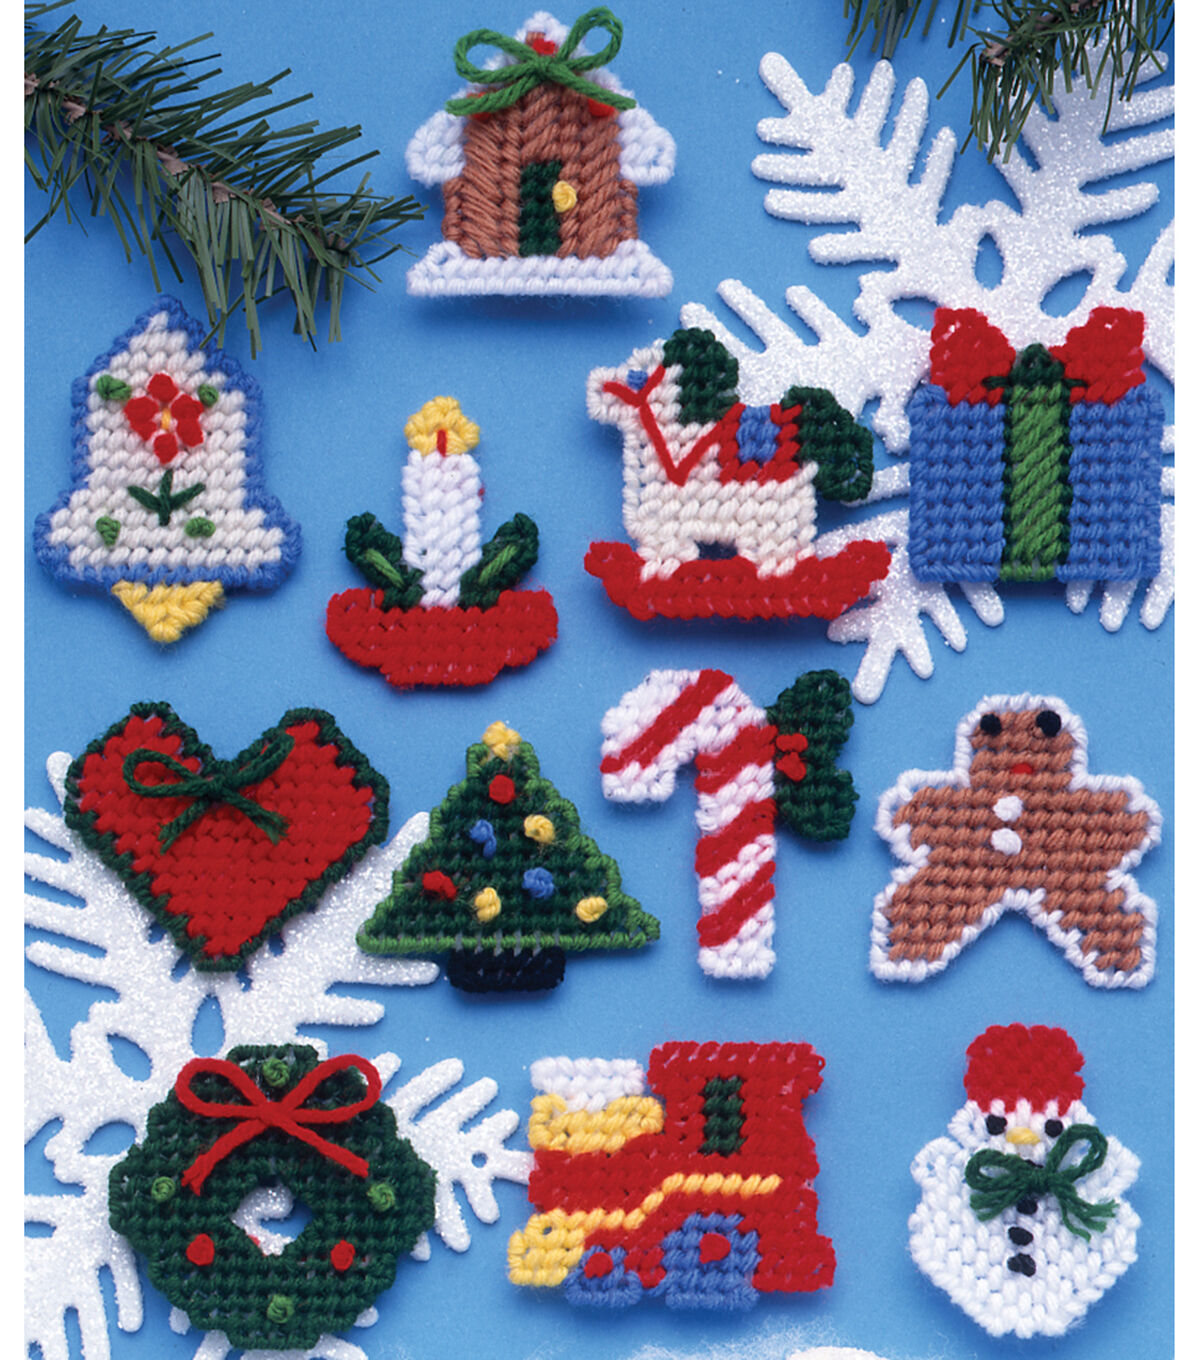 Design Works 2 Country Christmas Ornament Plastic Canvas Kit 12ct